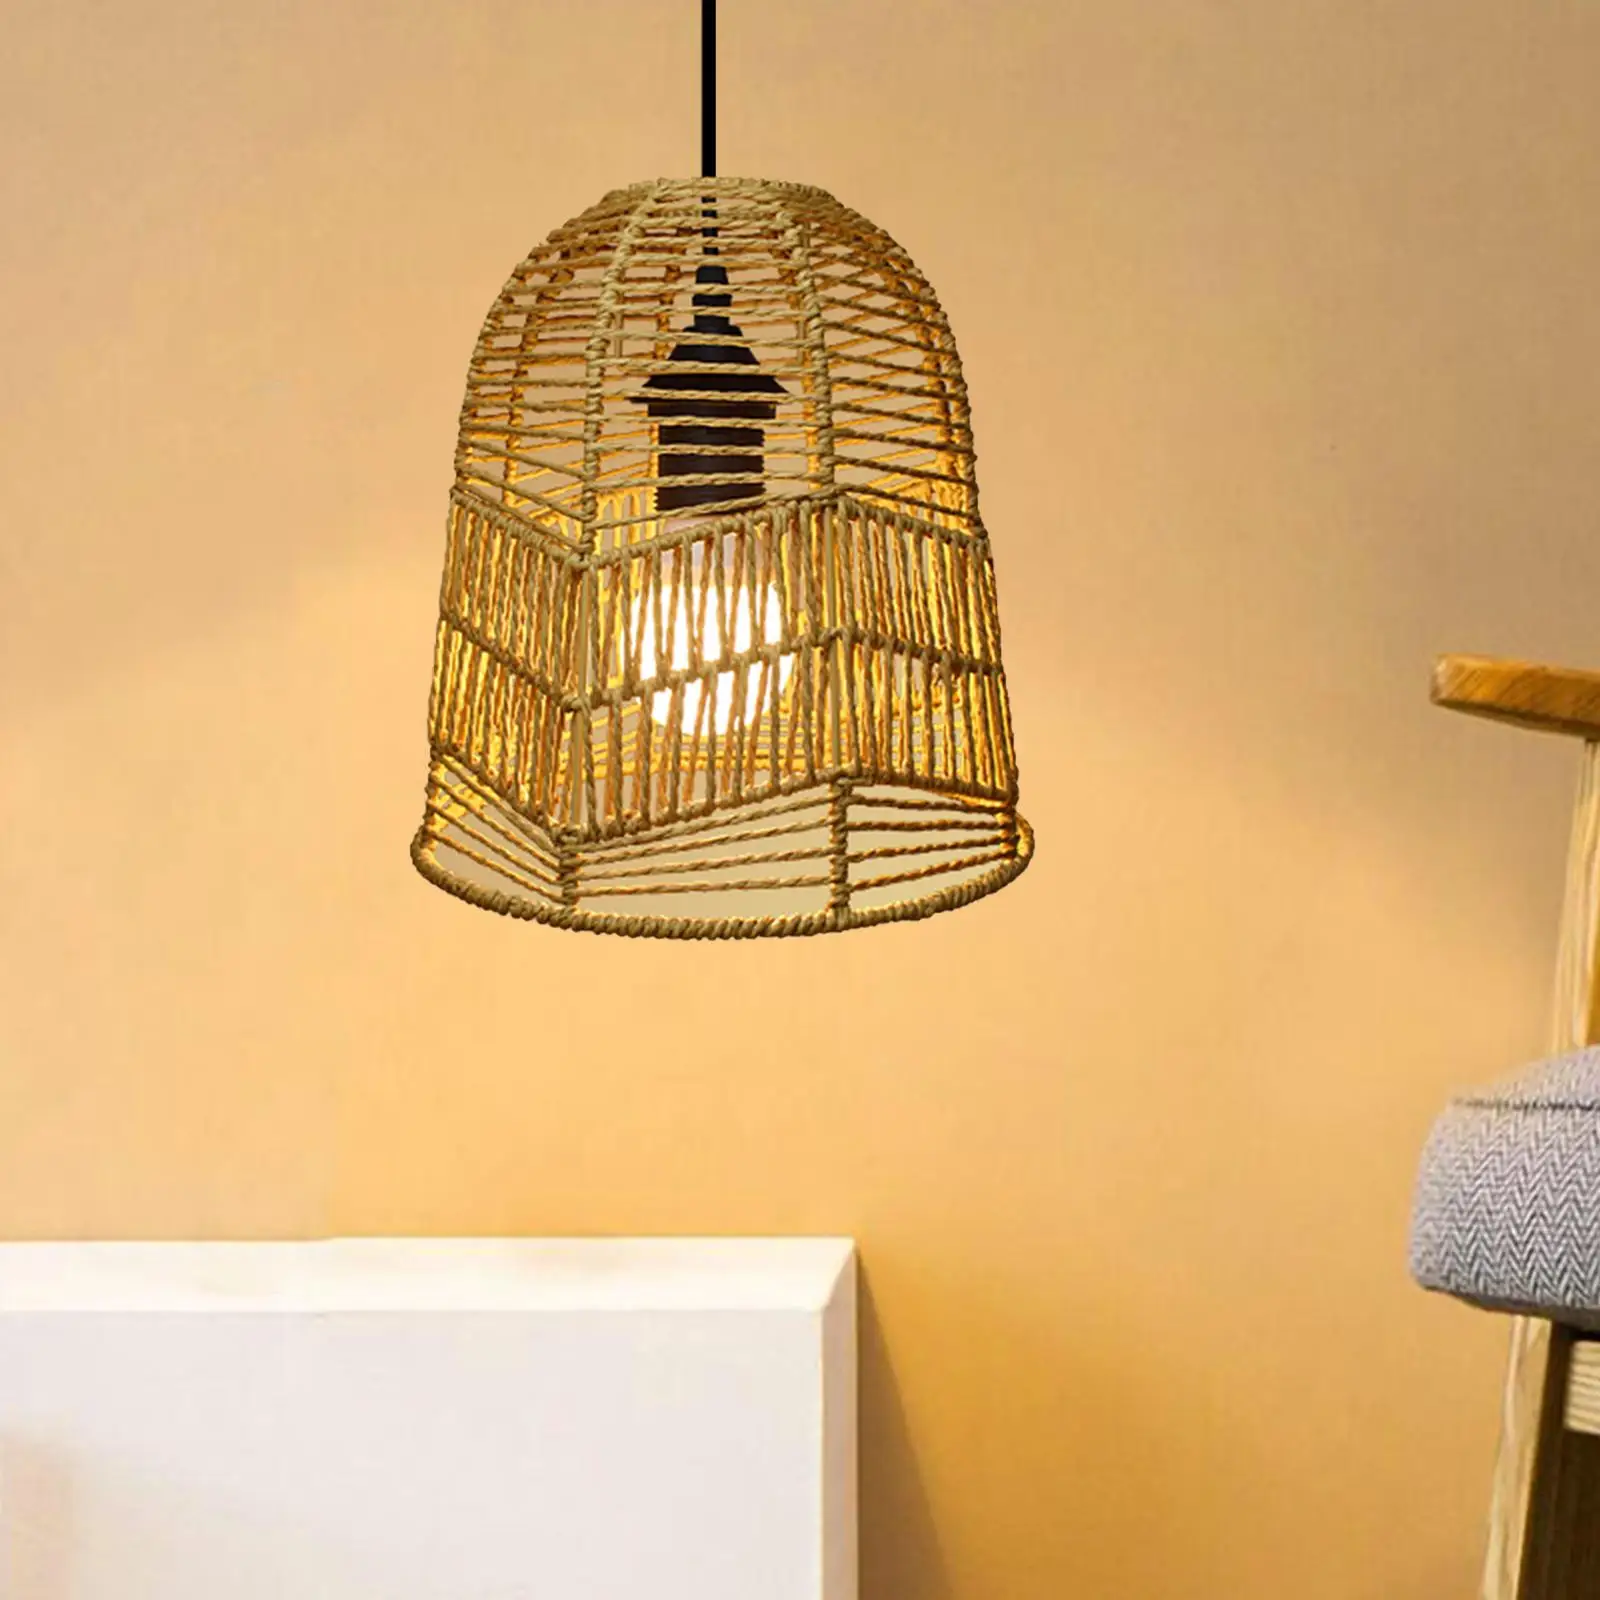 Pendant Lamp Shade Paper Rope Lamp Holder for Teahouse Kitchen Island Hotel